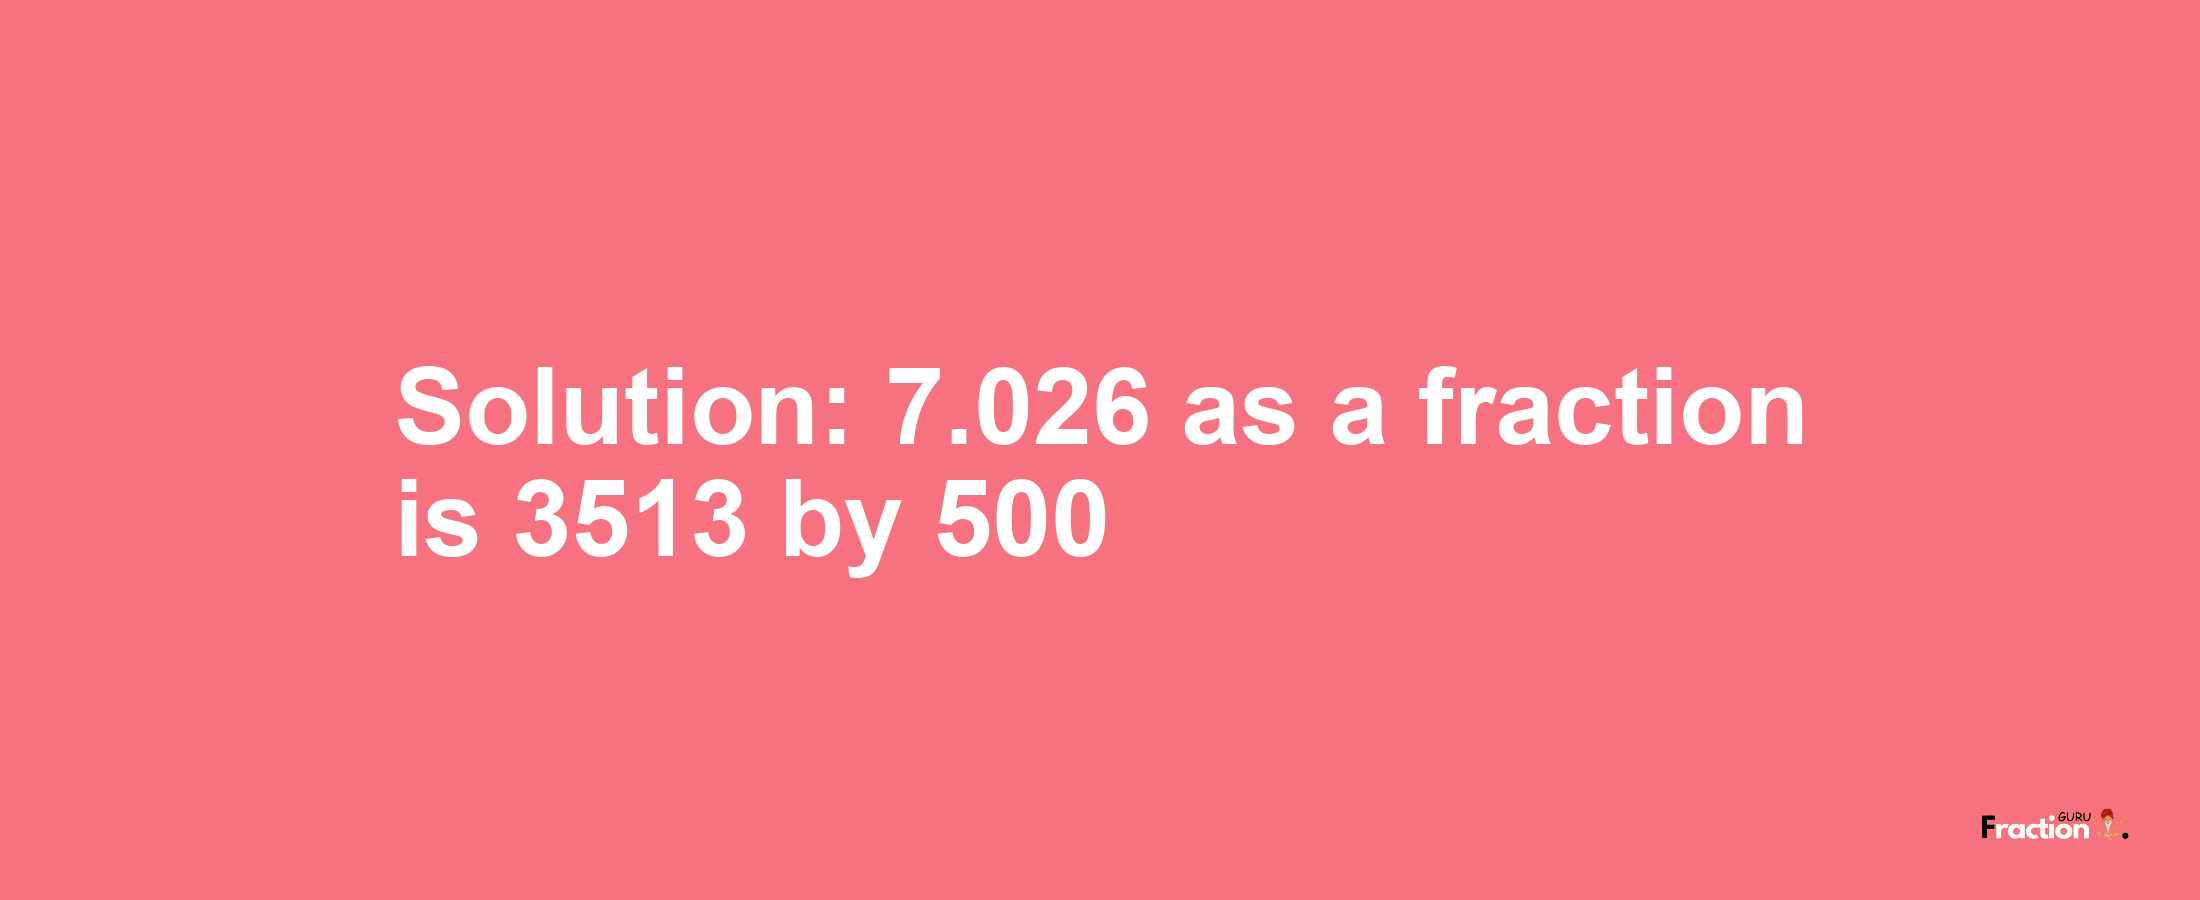 Solution:7.026 as a fraction is 3513/500